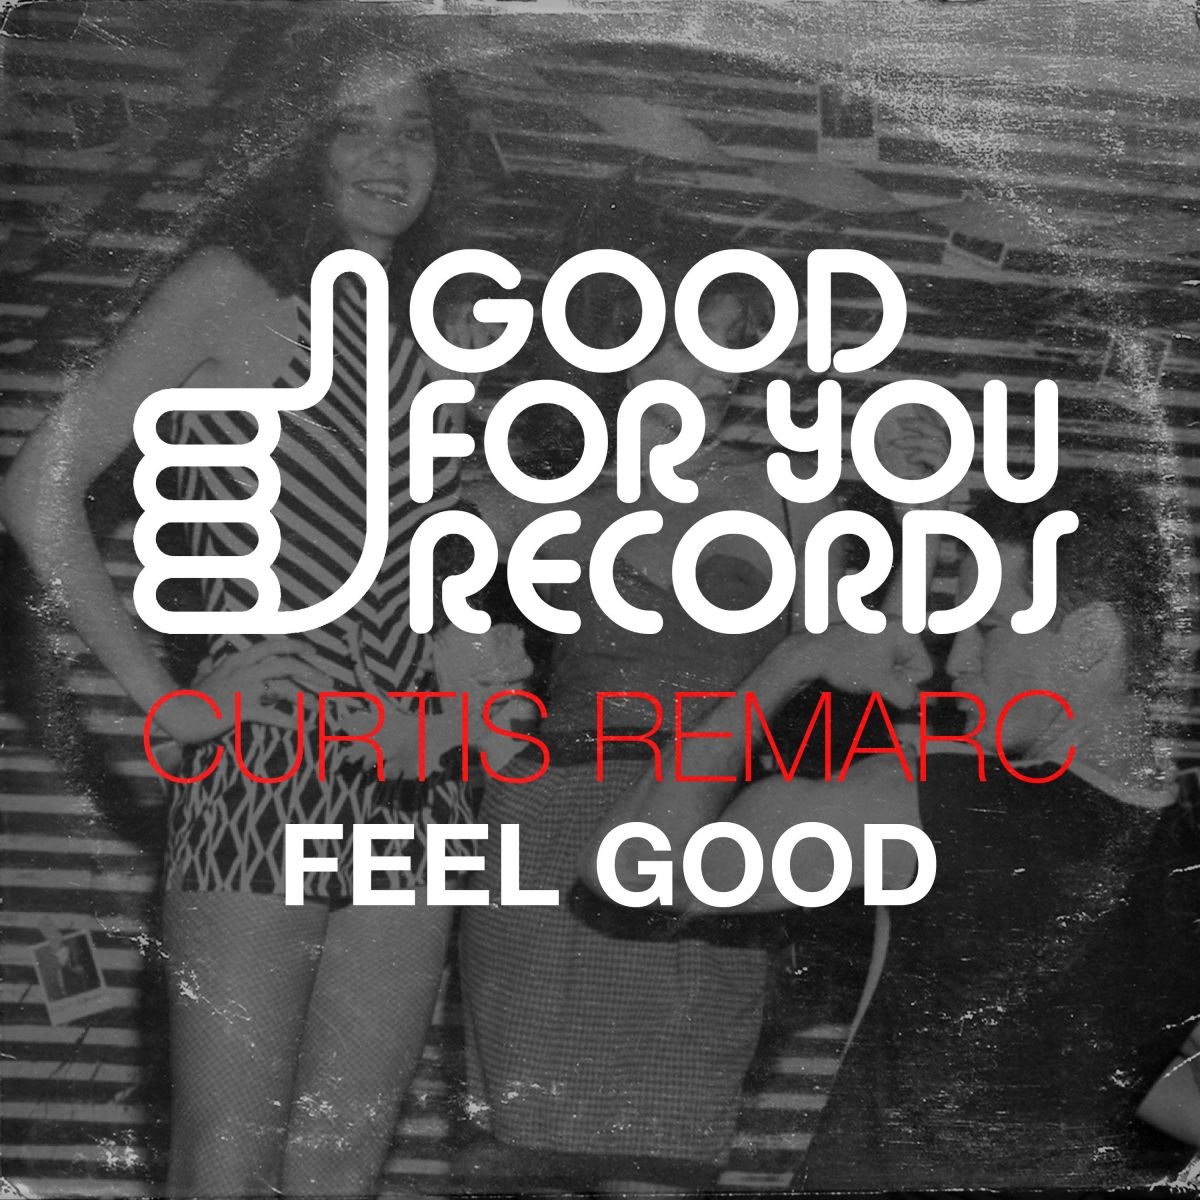 Curtis Remarc - Feel Good / Good For You Records